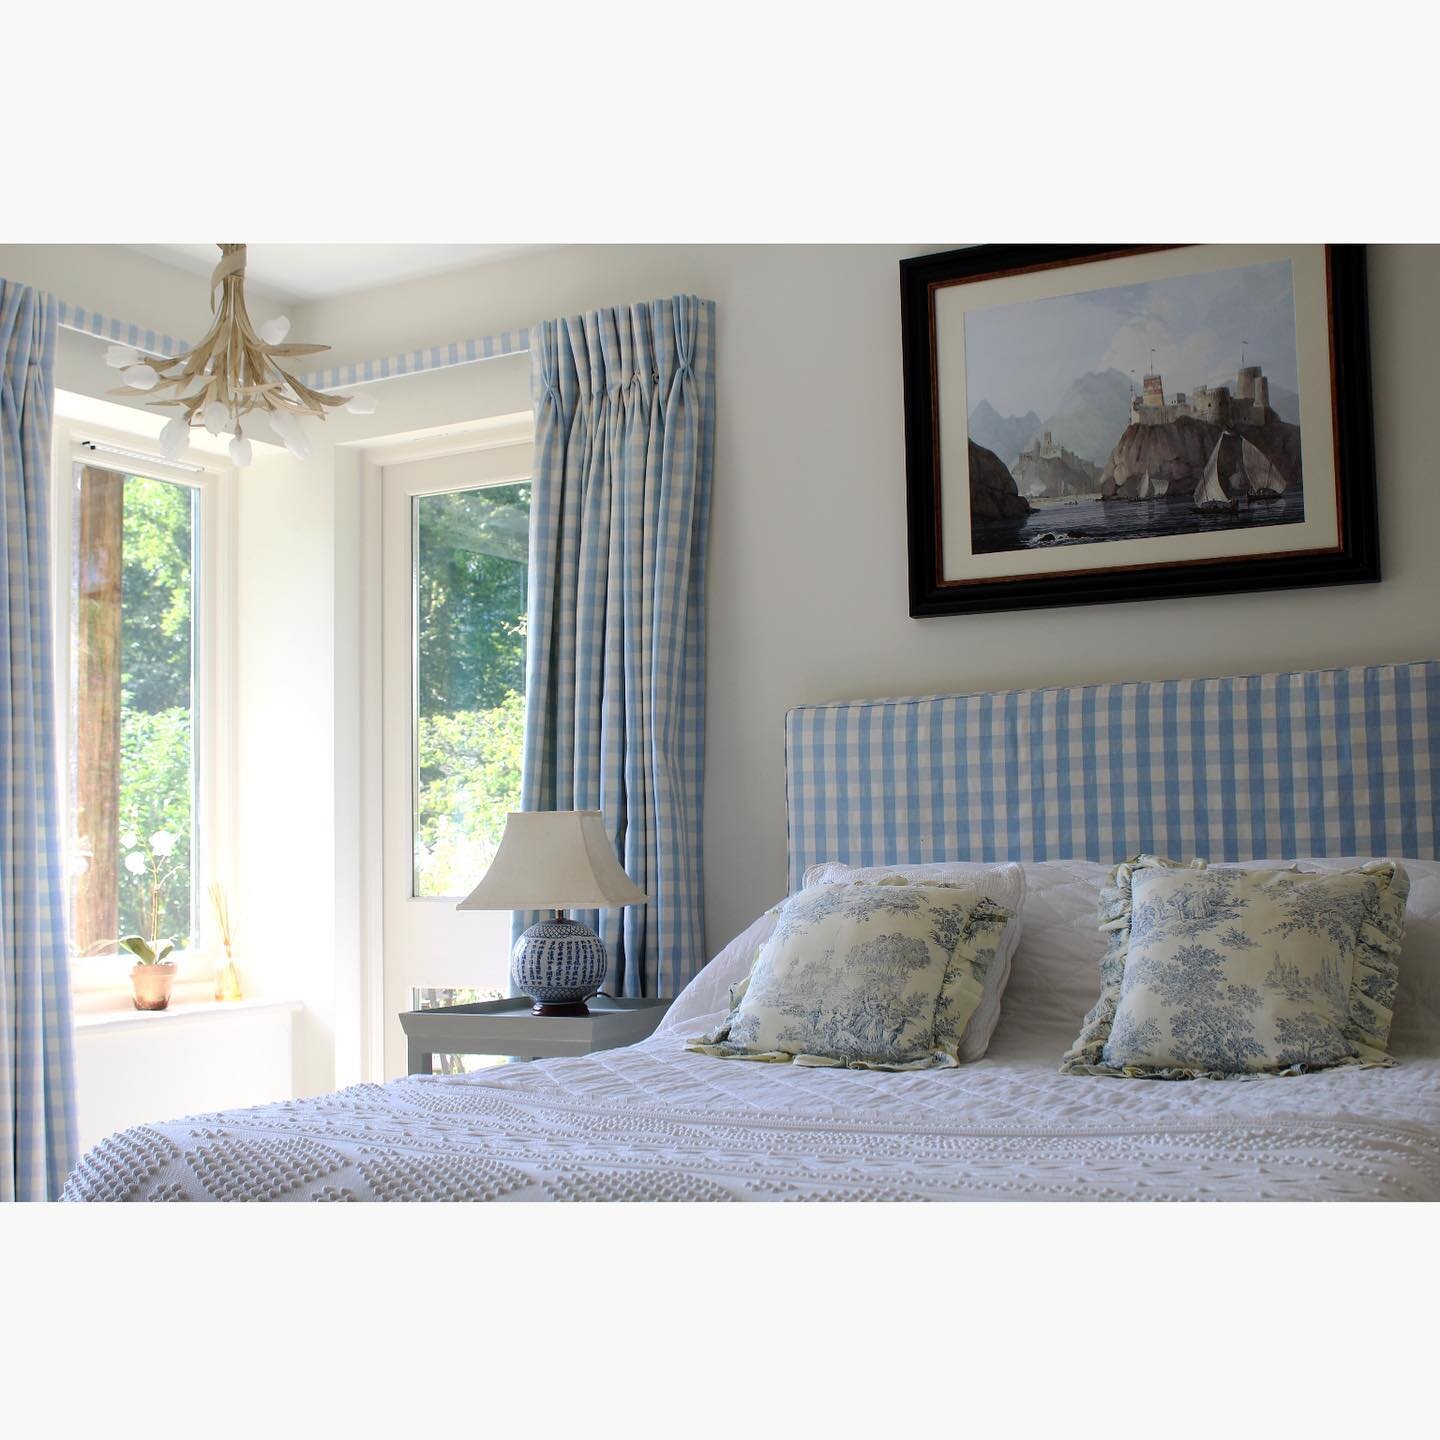 This pretty blue bedroom is done in Ian Mankin Suffolk Check one of our favourite suppliers. Their fabrics are all made from natural fibres, sustainably sourced and made in Great Britain. This is why we endorse them and other companies like them. #ia